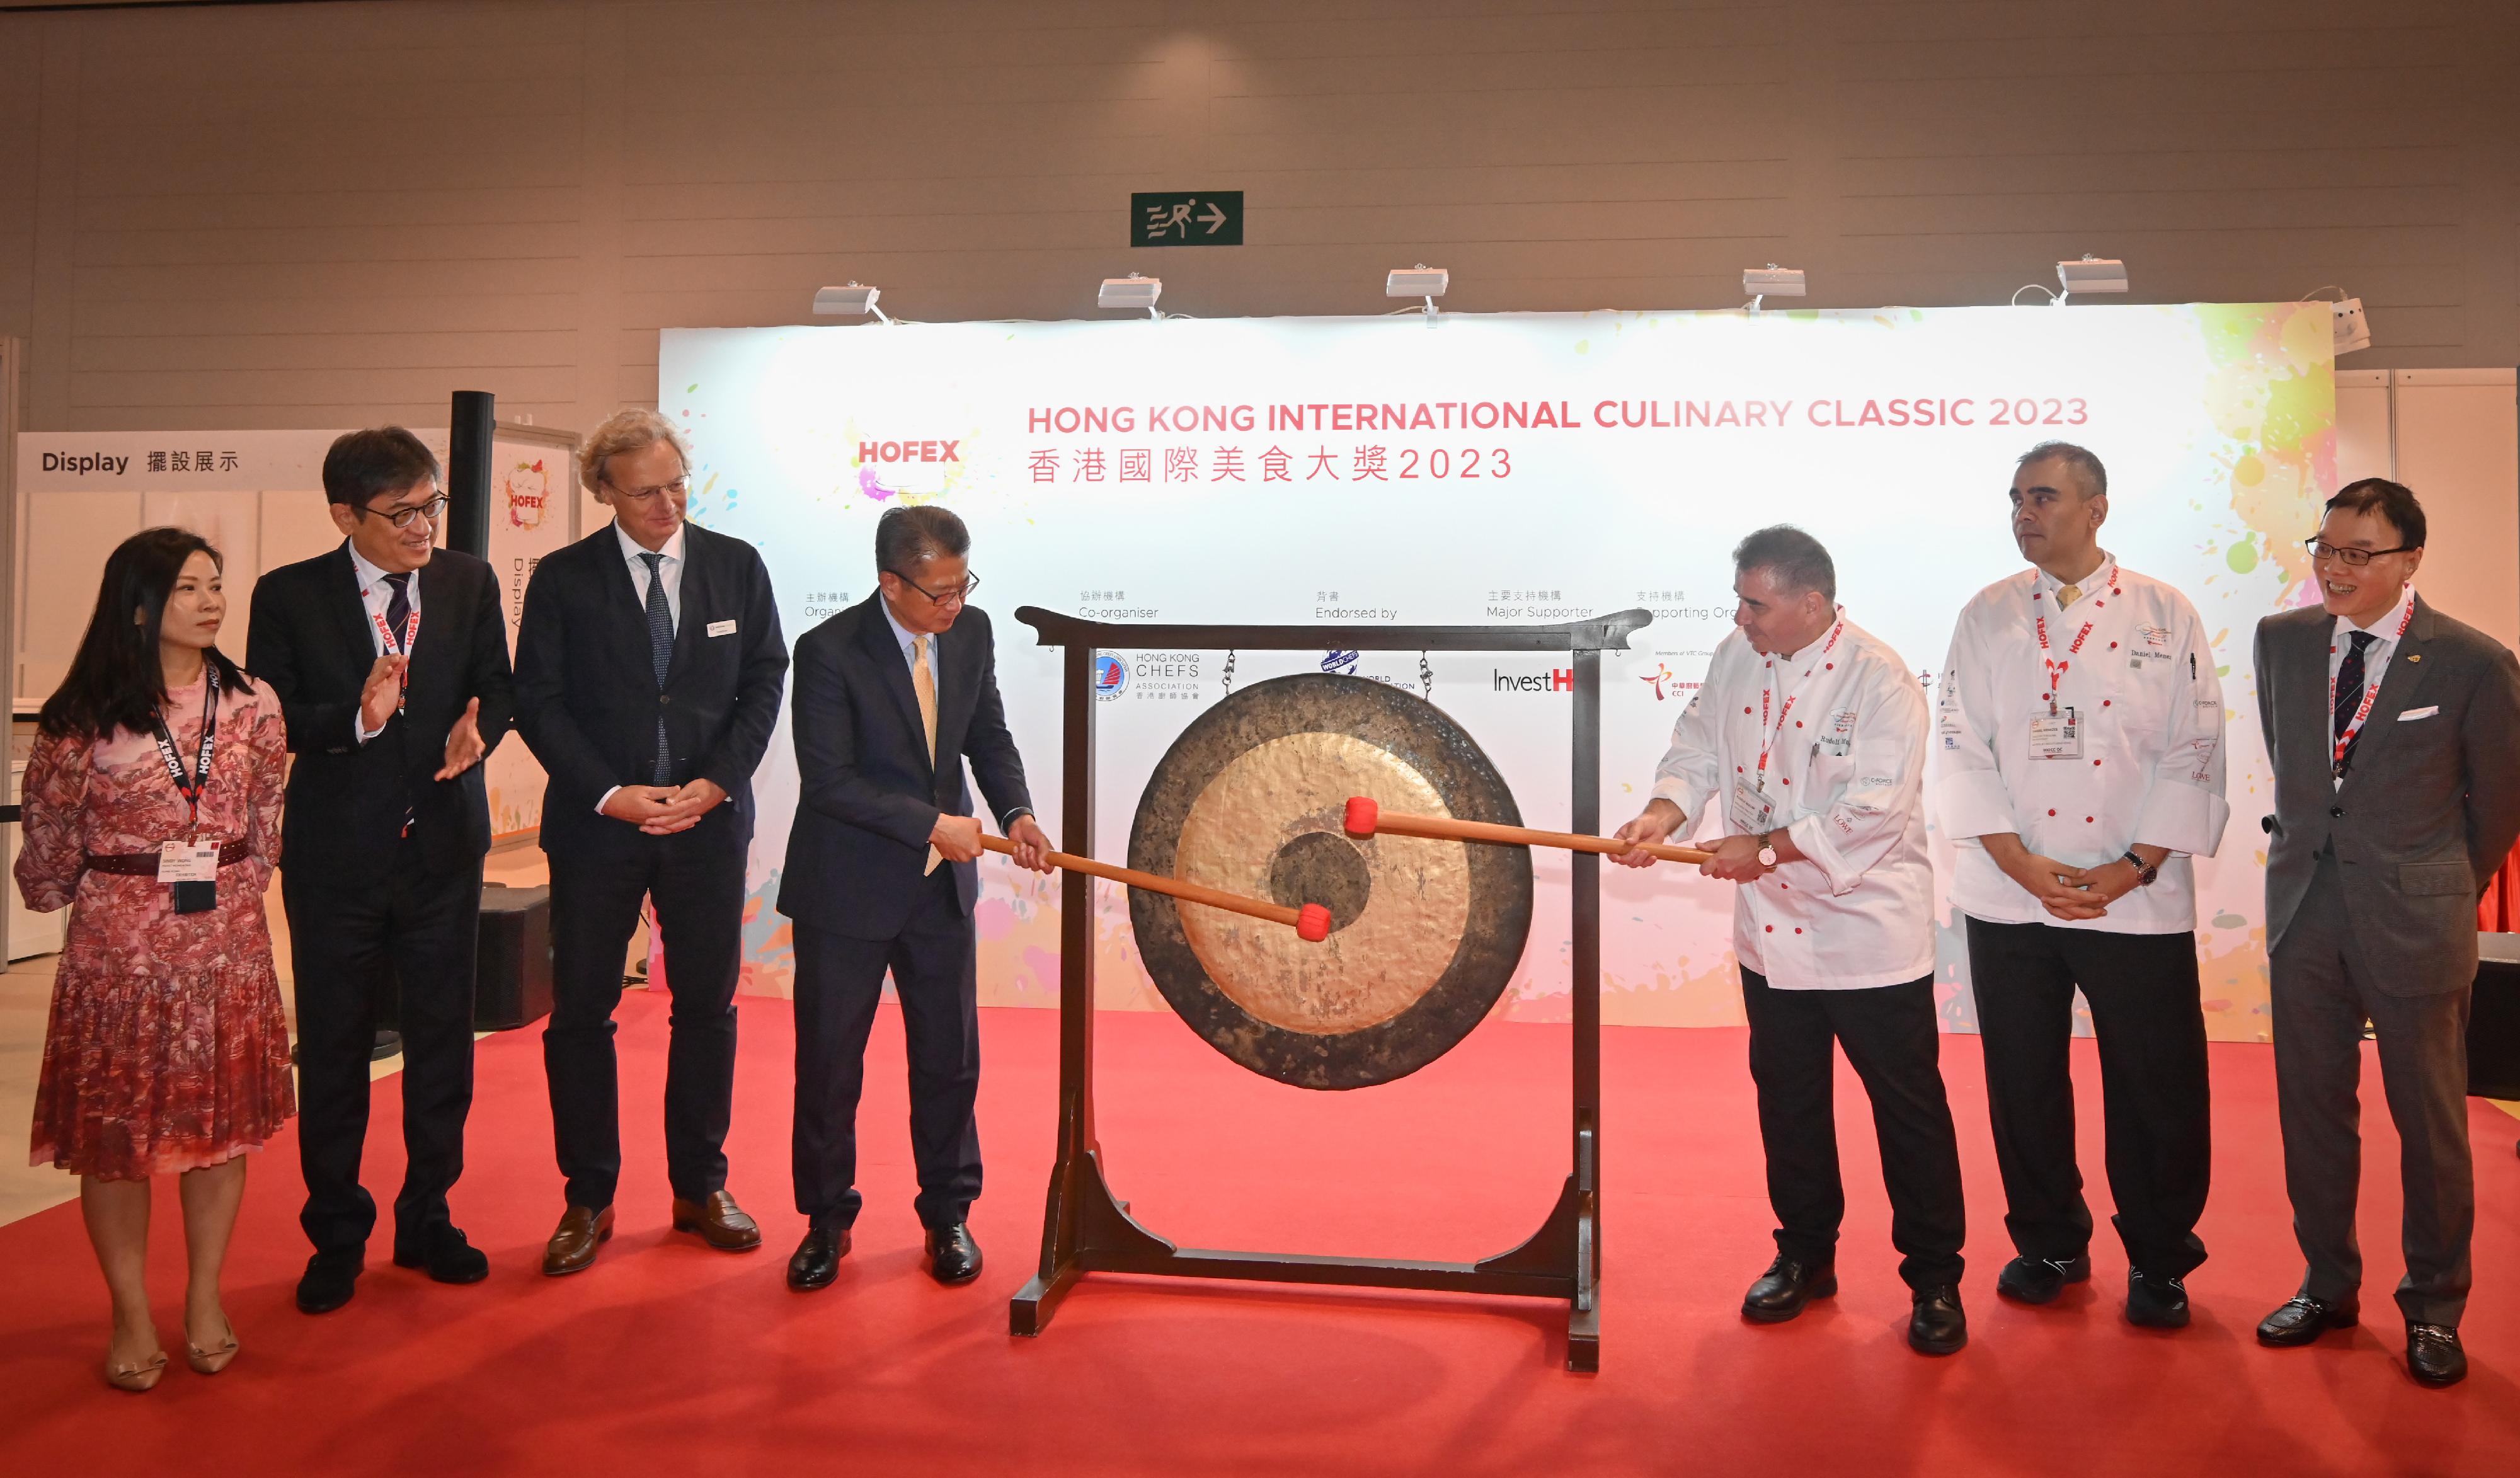 The Financial Secretary, Mr Paul Chan, attended the joint opening ceremony of HOFEX, ProWine Hong Kong @ HOFEX, the Retail Asia Conference & Expo, Build4Asia 2023 and the Hong Kong International Culinary Classic today (May 10). Photo shows (from second left) the Executive Director of the Hong Kong Tourism Board, Mr Dane Cheng; the Senior Vice President of Informa Markets in Asia, Mr David Bondi; Mr Chan; the Chairman of the Organising Committee of the Hong Kong International Culinary Classic, Mr Rudolf Muller, and other guests officiating at the gong striking ceremony.